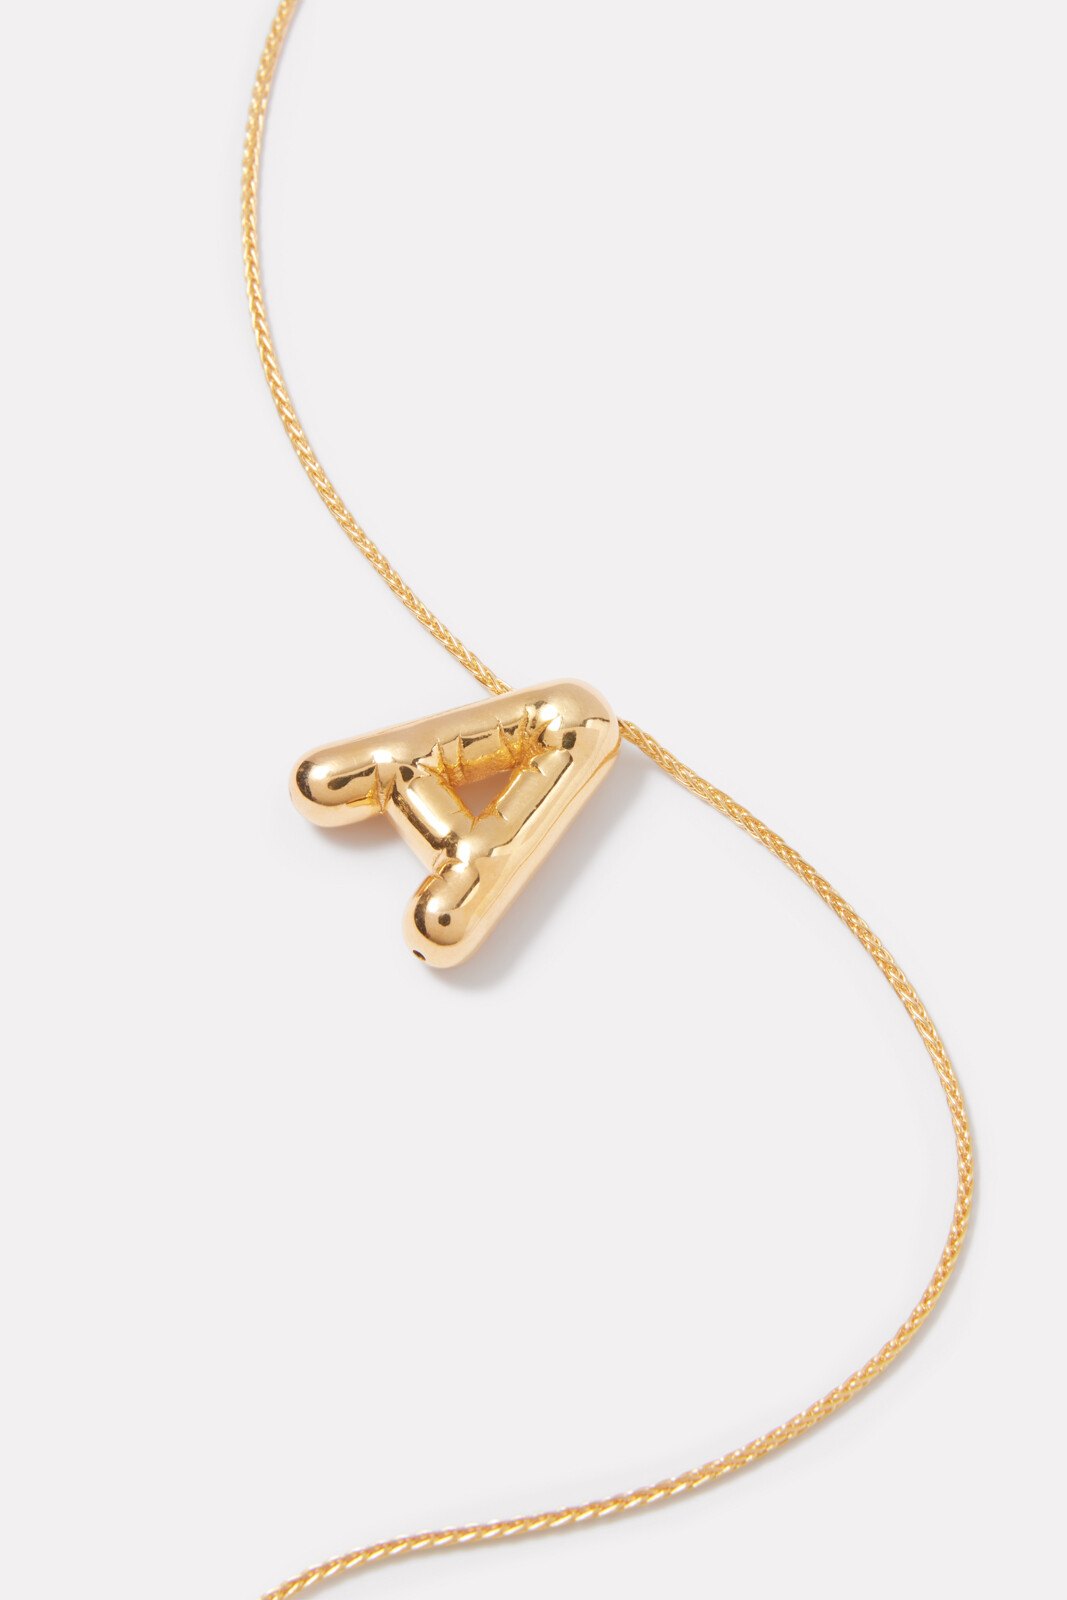 Amazon.com: Puffy Balloon Letter Initial C Pendant Charm Solid 10k Yellow  Gold 23mm x 15mm : Handmade Products